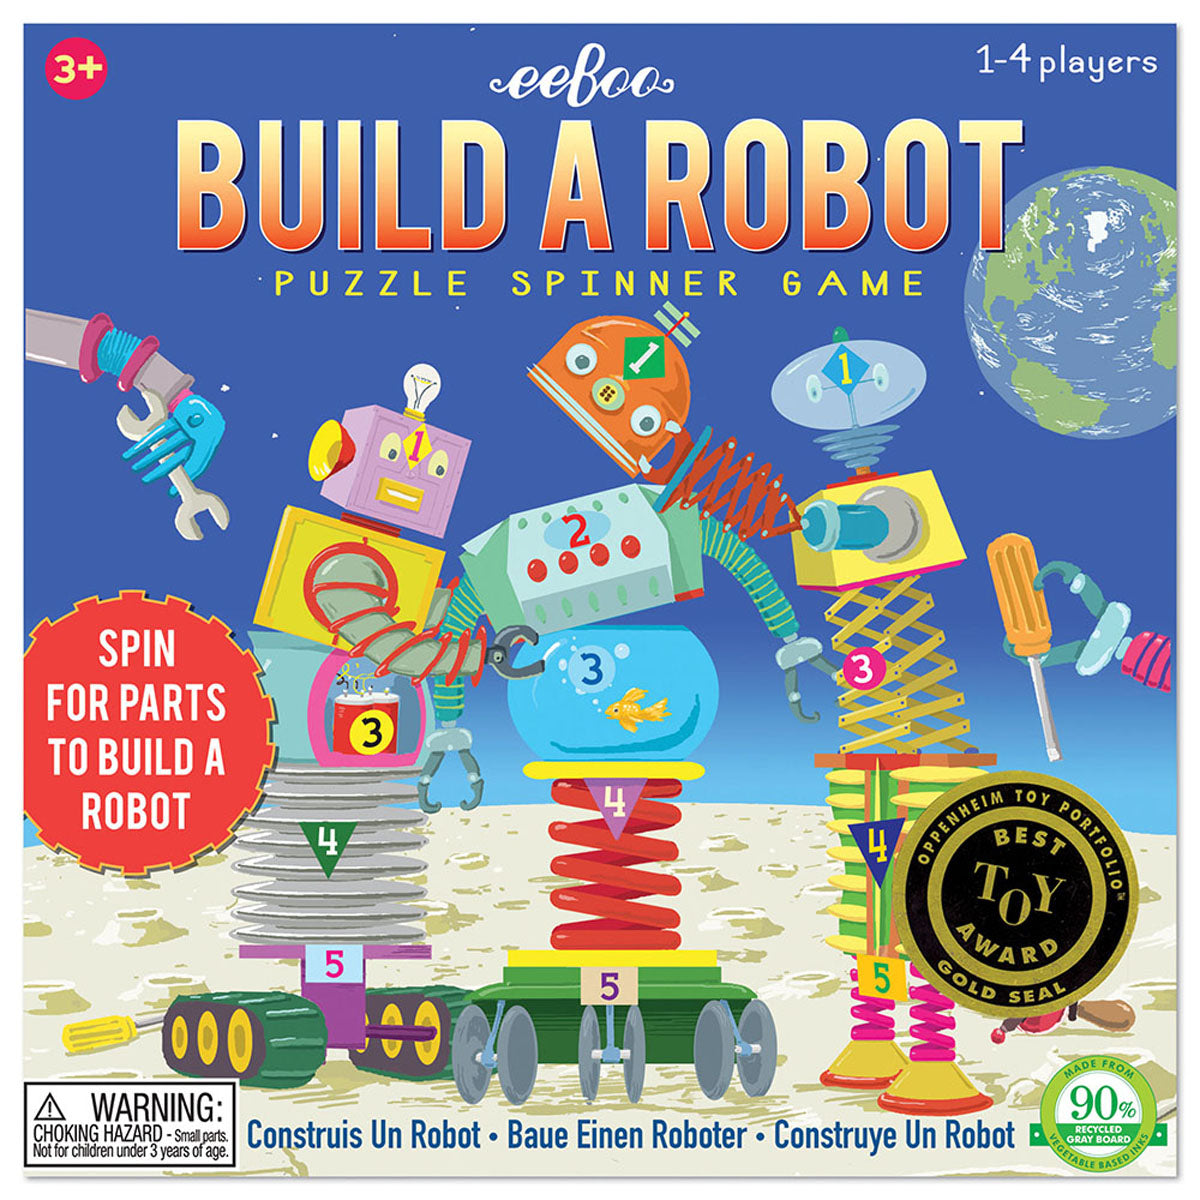 Mill & Hide - Bobangles - eeBoo - Spinner Game - Build a Robot